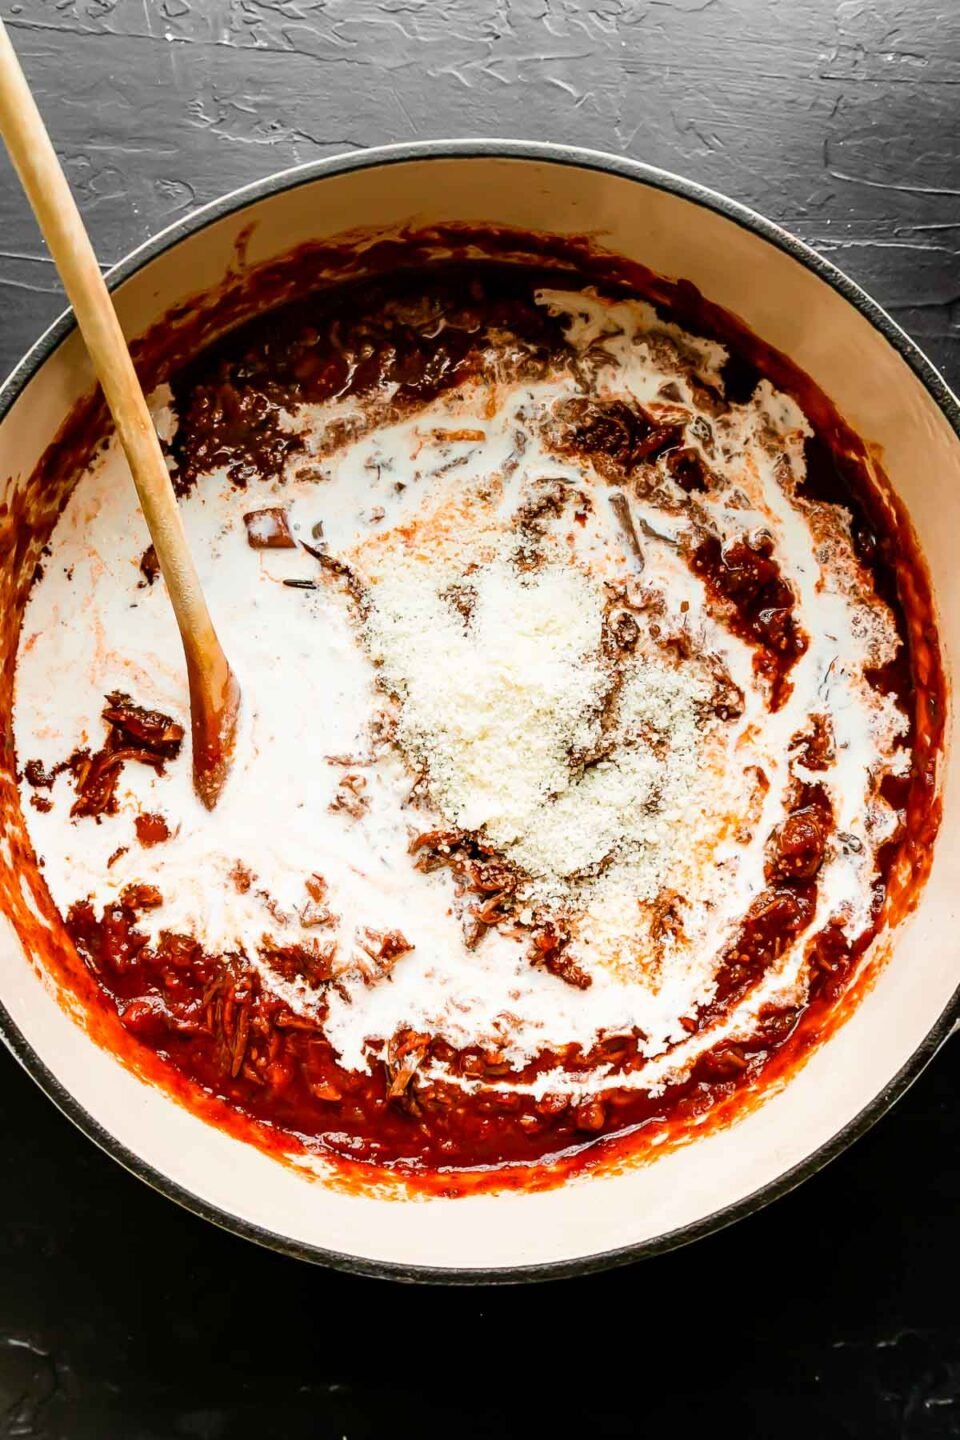 Beef ragu sauce fills a large white pot that sits atop a black textured surface. The sauce has just been finished with heavy cream and grated parmesan. A wooden spoon rests inside of the pot for stirring.